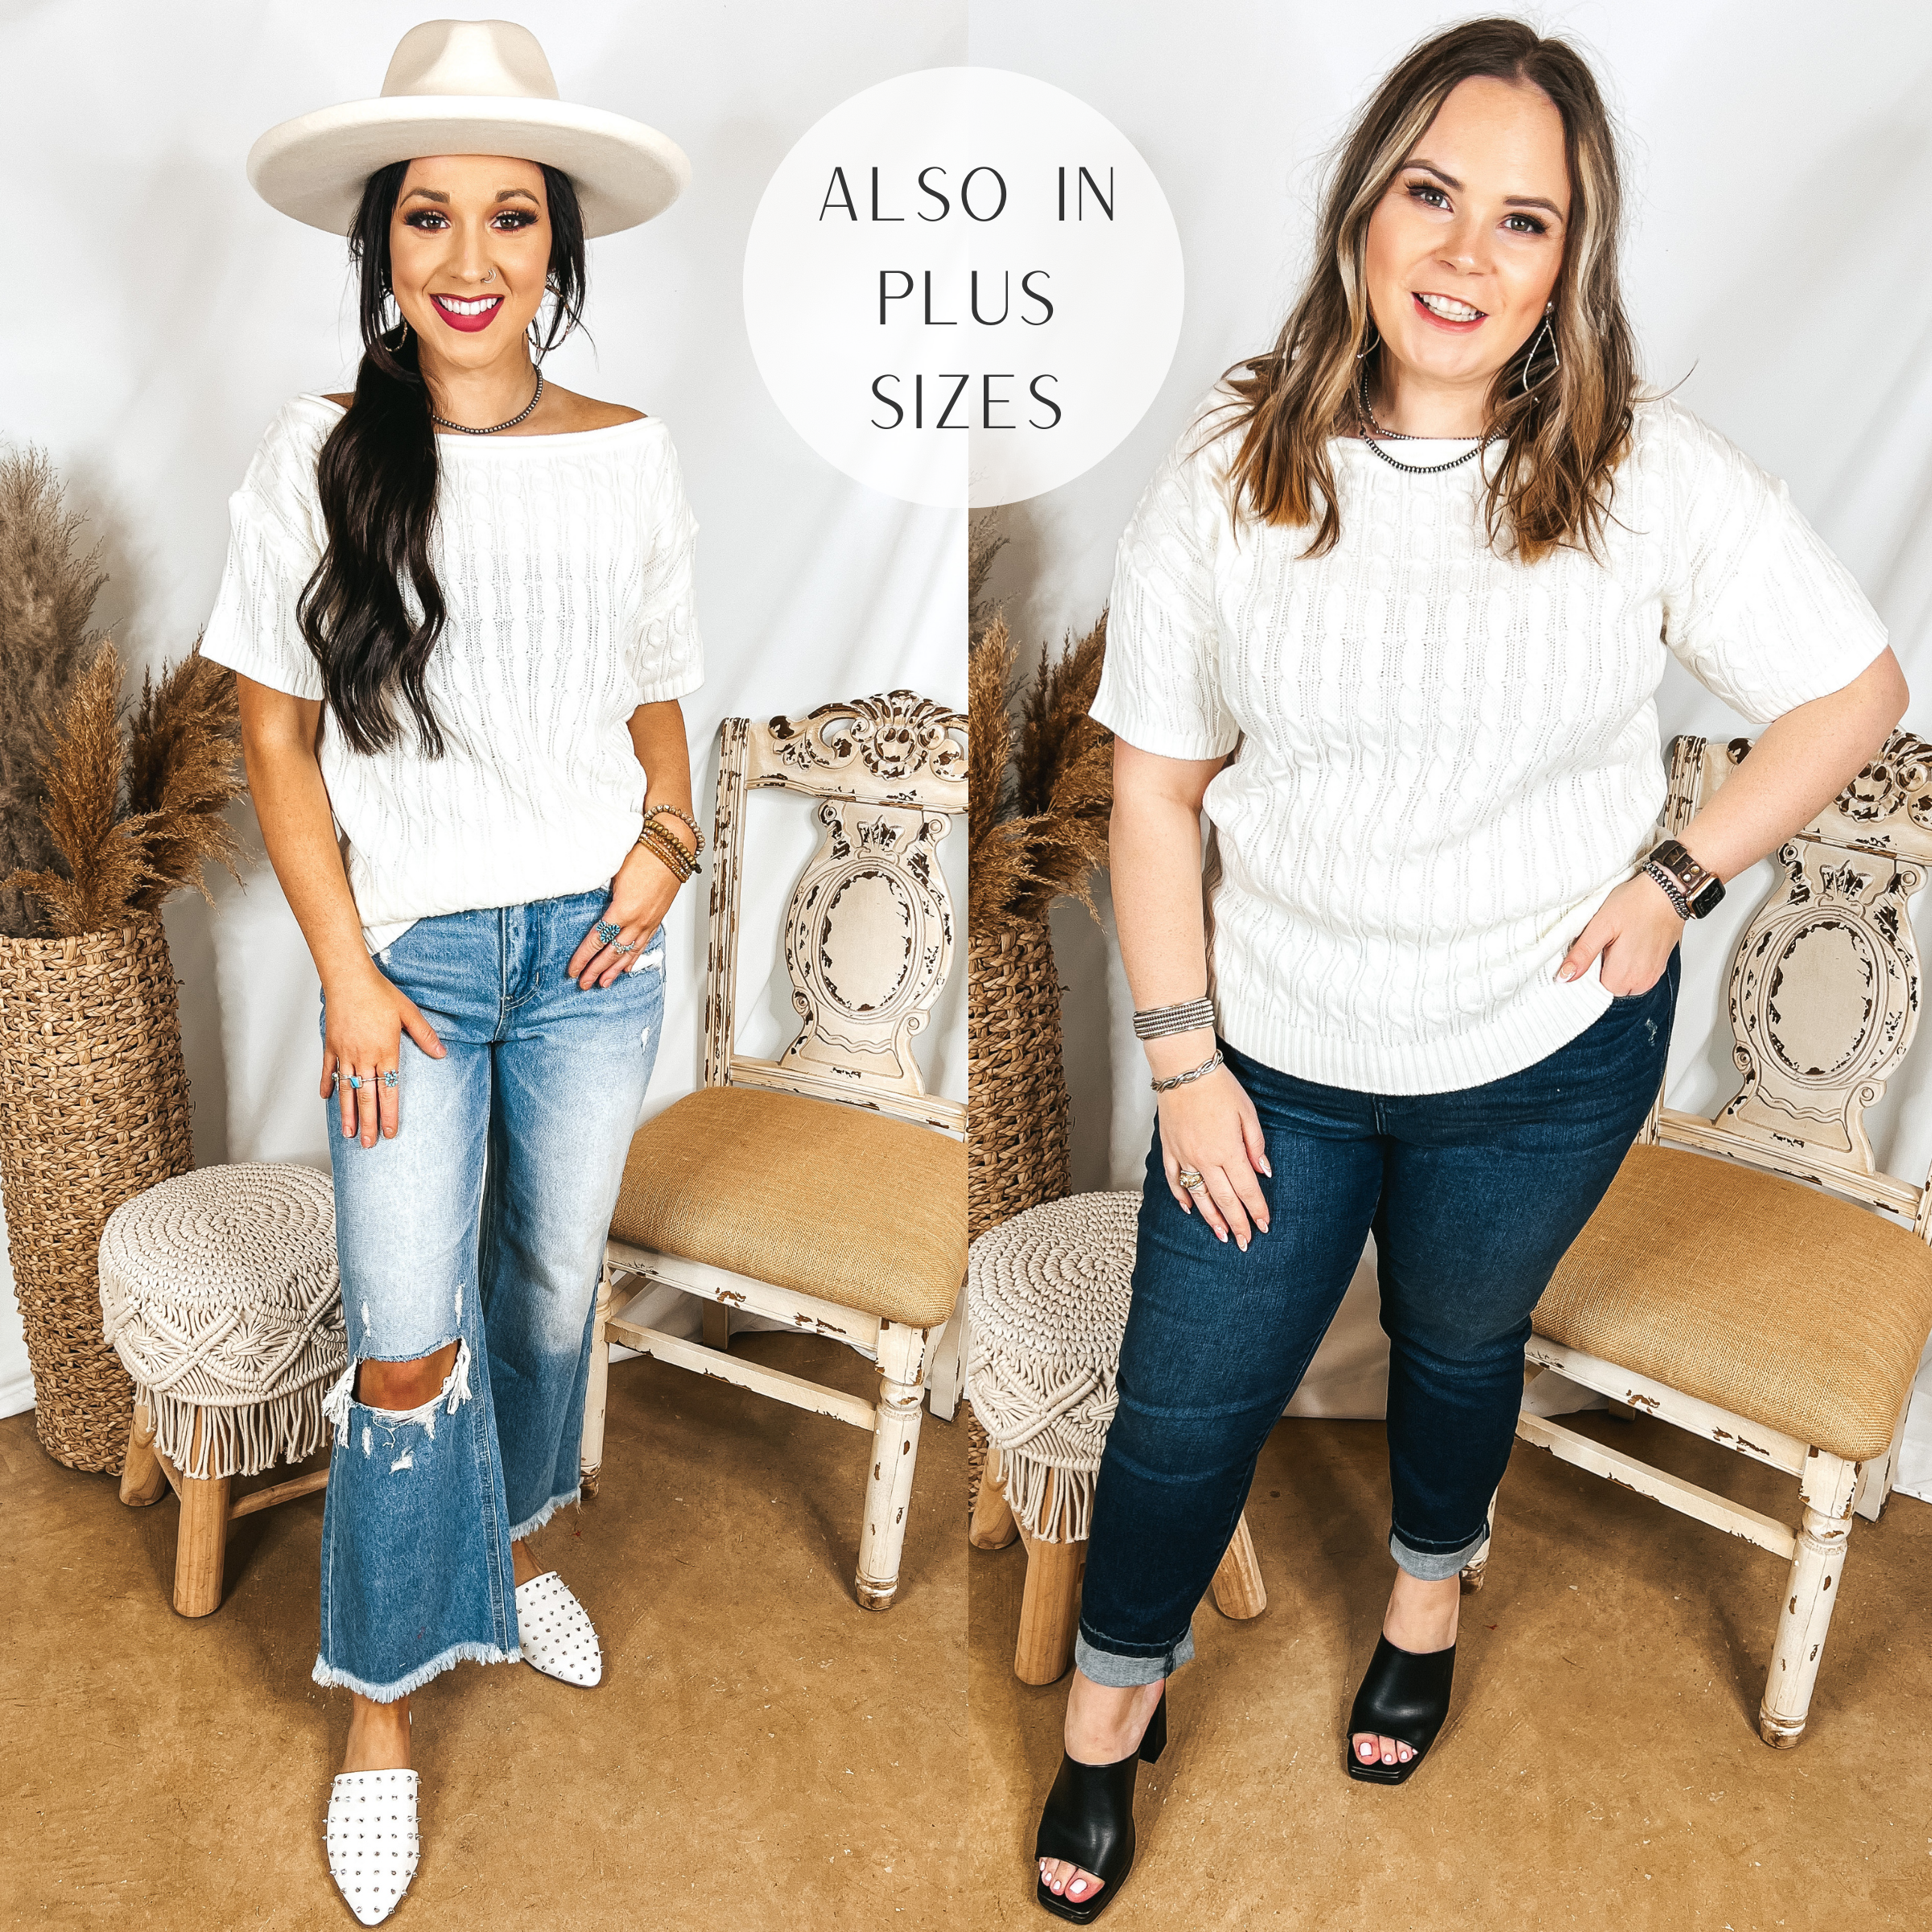 Day Date Short Sleeve Sweater with Scoop Neckline in Ivory - Giddy Up Glamour Boutique